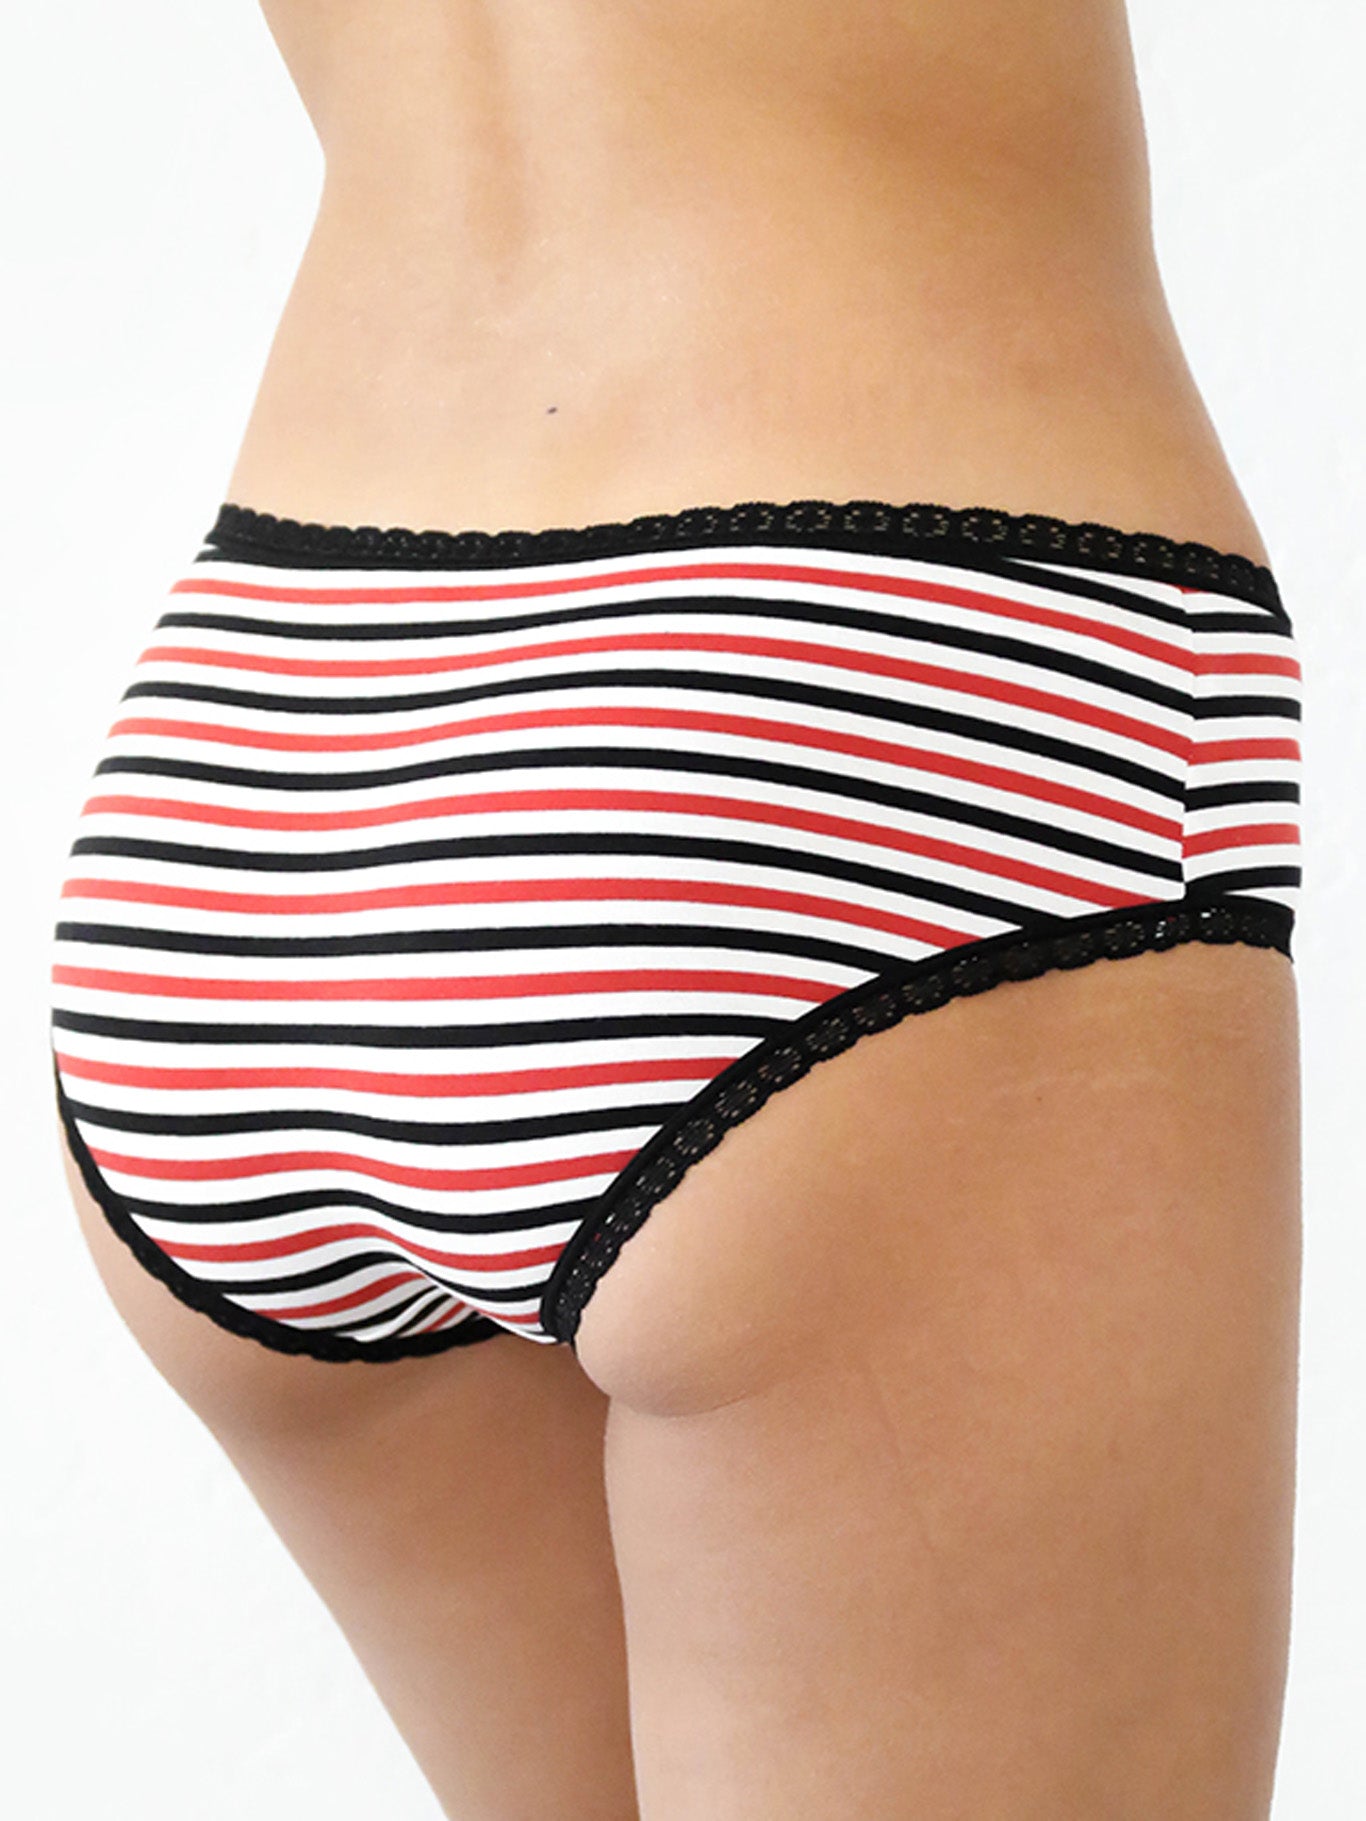 1131-15 | Hipster briefs with lace,Off-White-Red-Black